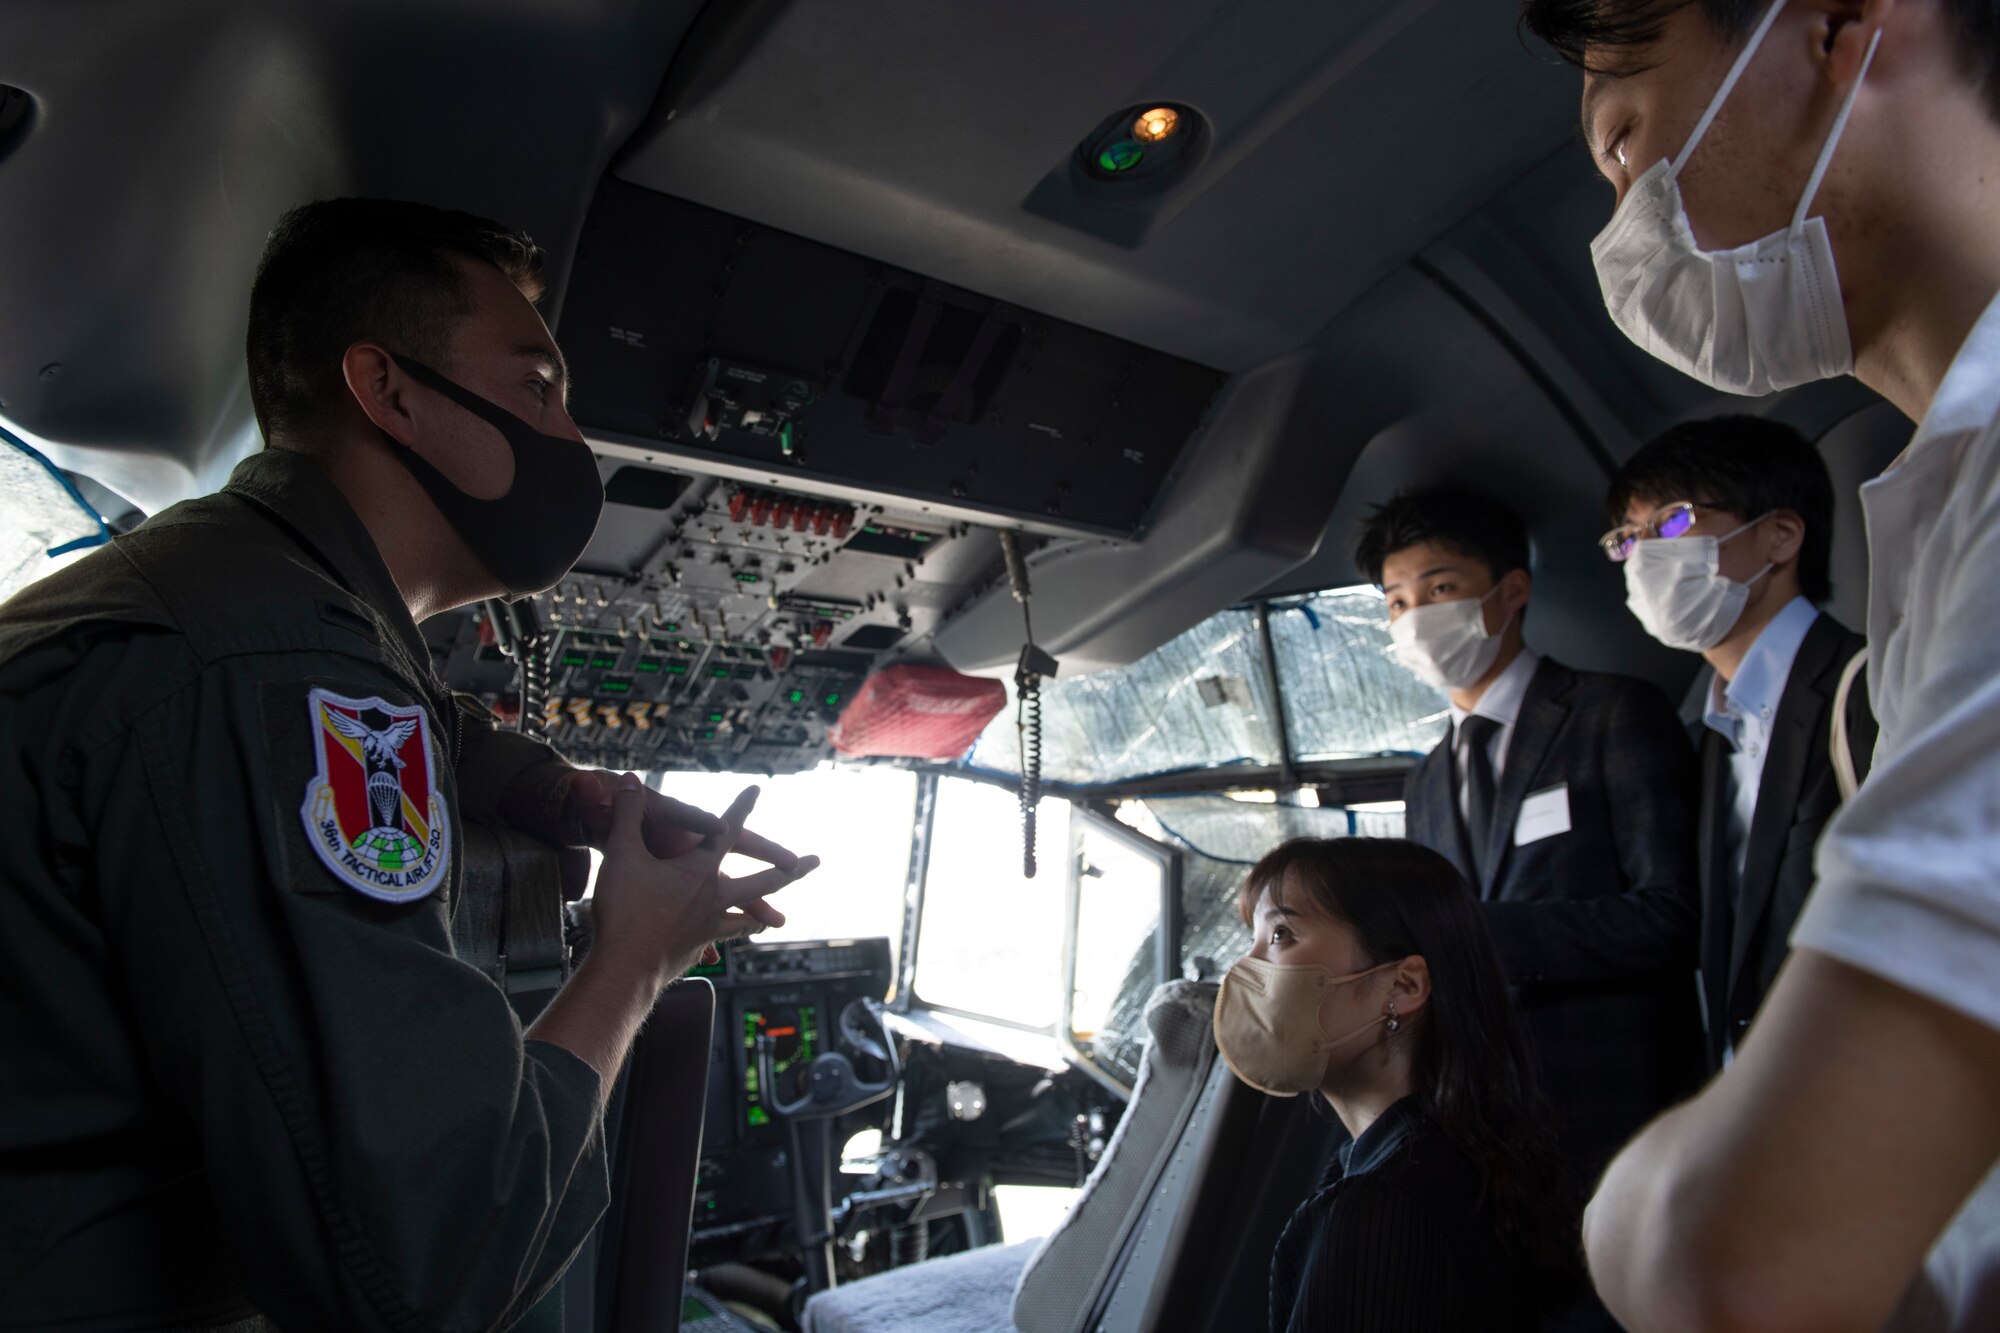 A pilot with the 36th Airlift Squadron, 1st Lt. Kevin Mendez, left, explains the 36th AS mission and C-130J Super Hercules capabilities during an Ambassador’s Youth Council tour at Yokota Air Base, Japan, April 22, 2022. Mendez explained that a C-130J can fly lower and slower over drop zones compared to larger cargo aircraft and how these aircraft play an important role across the Indo-Pacific. (U.S. Air Force photo by Tech. Sgt. Joshua Edwards)